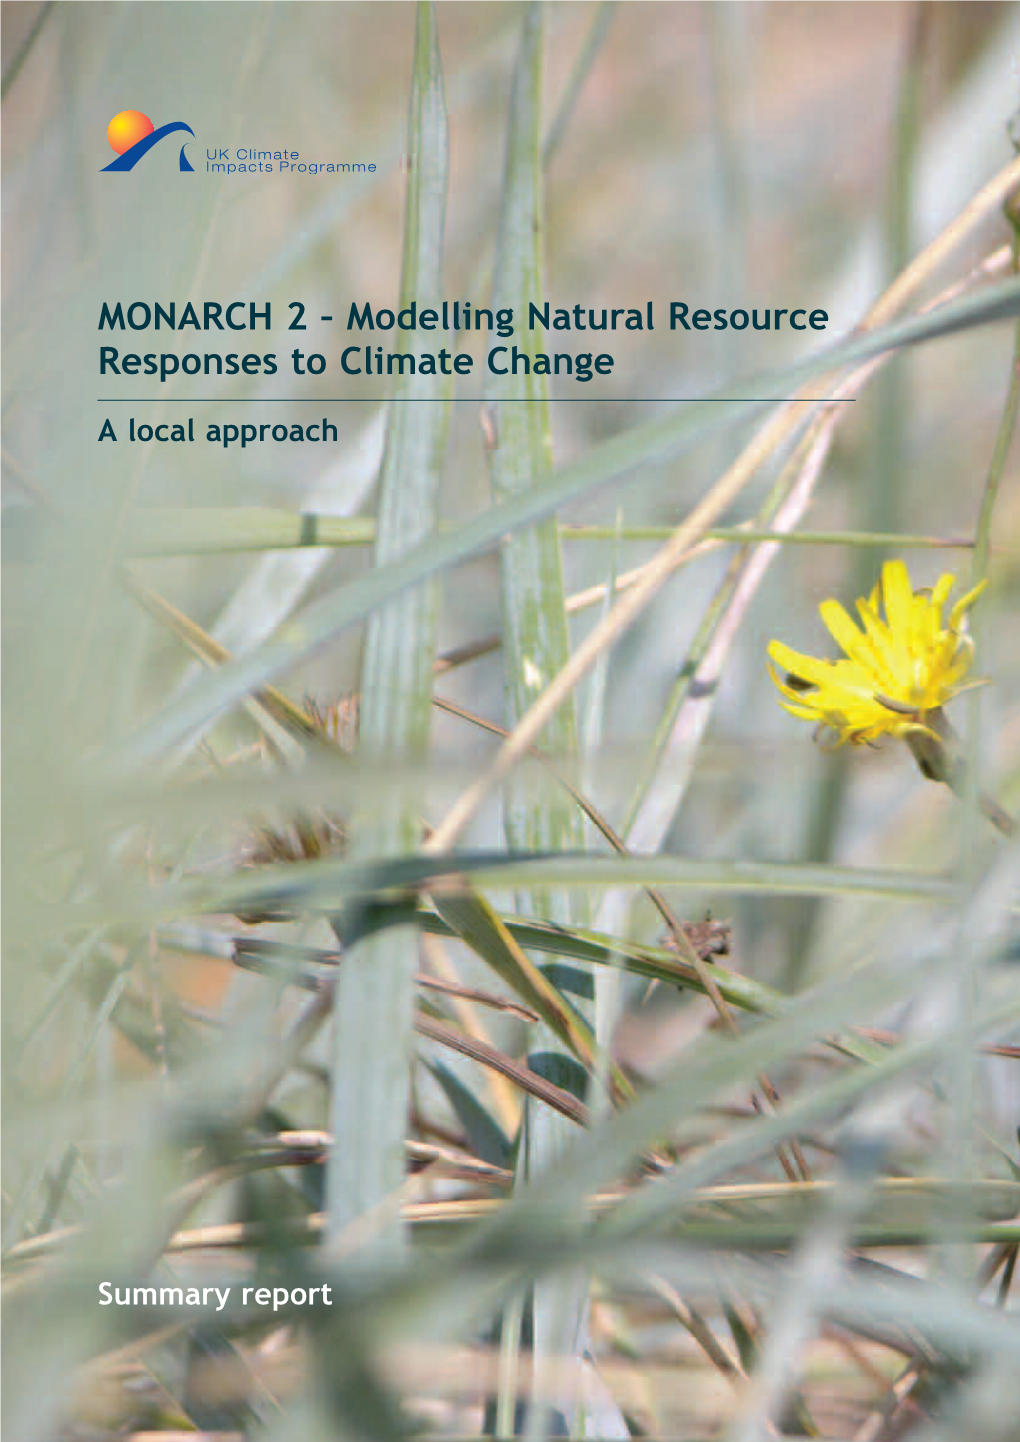 MONARCH 2 – Modelling Natural Resource Responses to Climate Change